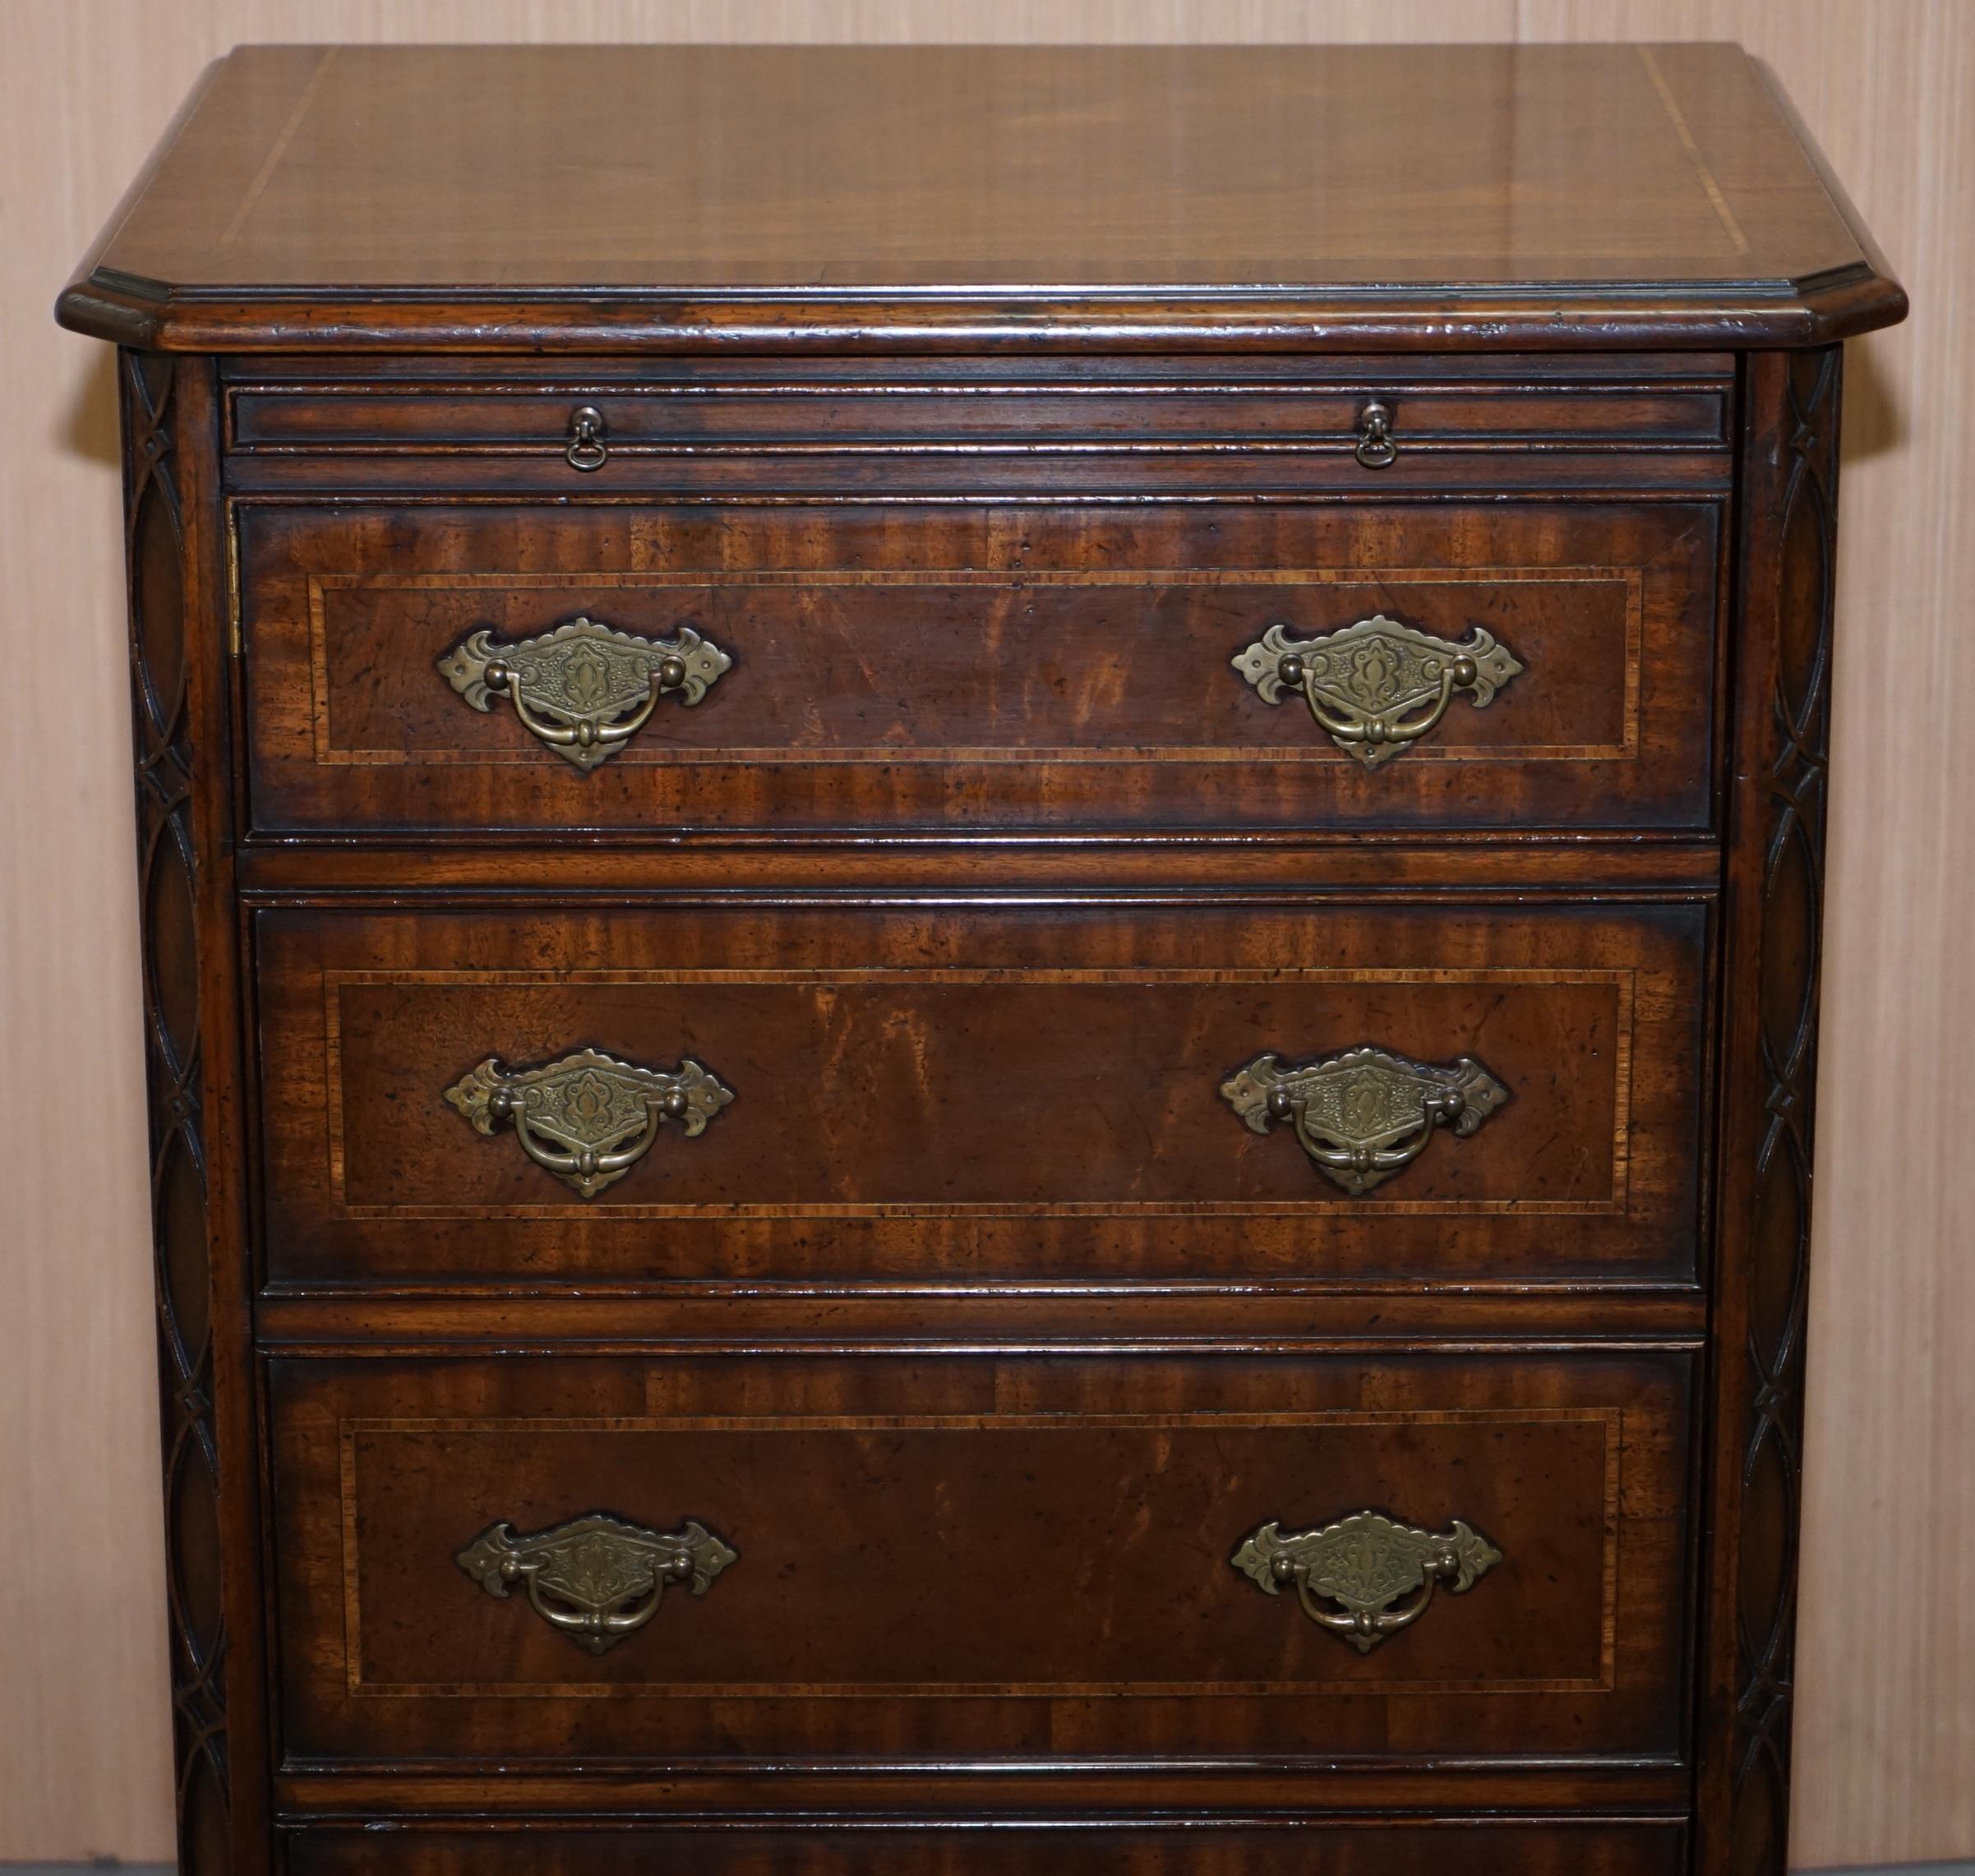 English Stunning Record Player Cabinet Cupboard Hidden as Regency Chest of Drawers